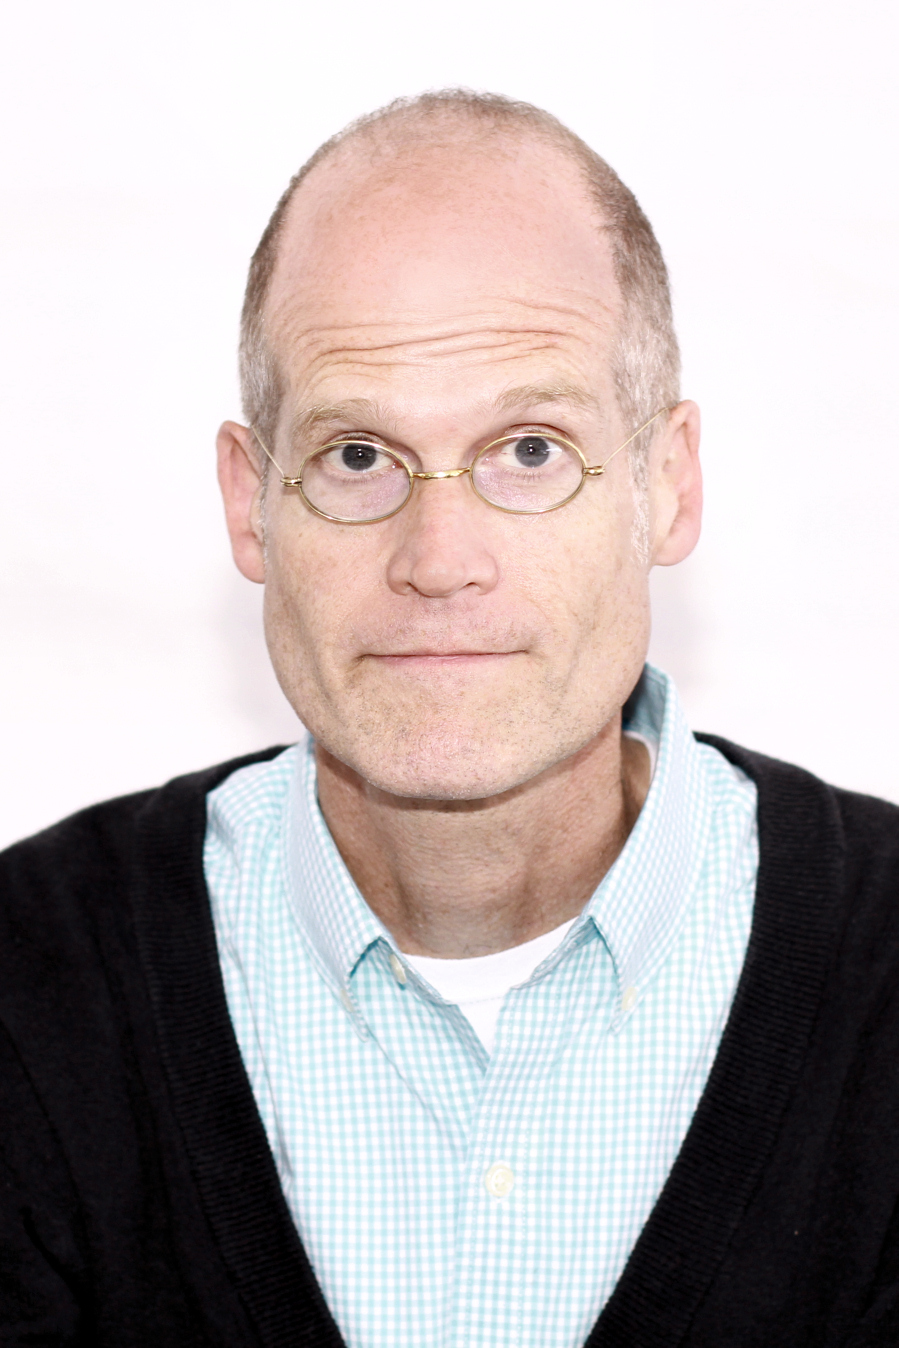 Chris Ware at the 2019 Texas Book Festival in Austin, Texas, United States © Larry D. Moore | Fuente: wikipedia